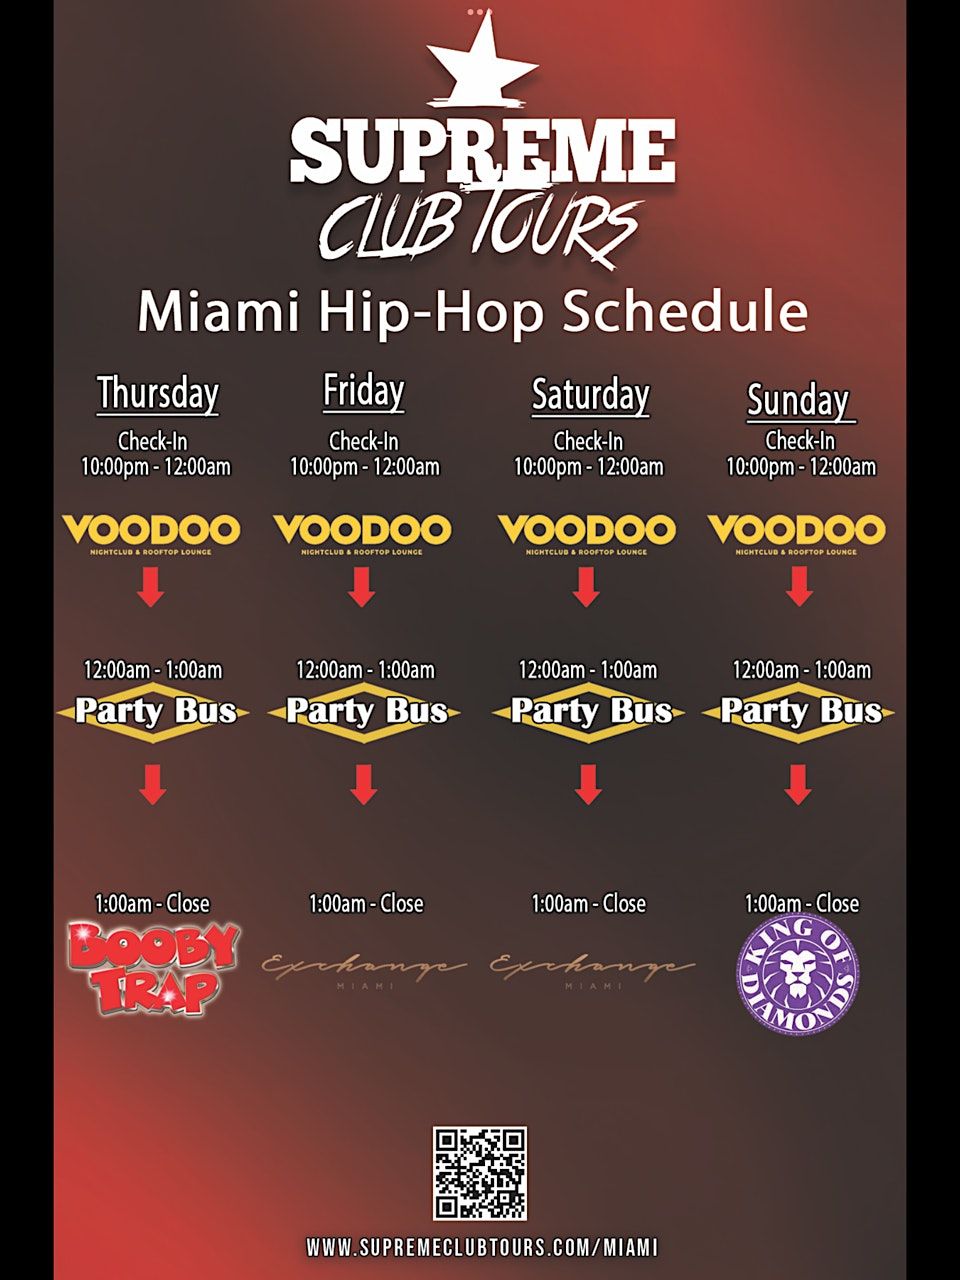 Miami Hip Hop Club Crawl with party bus experience & open bar